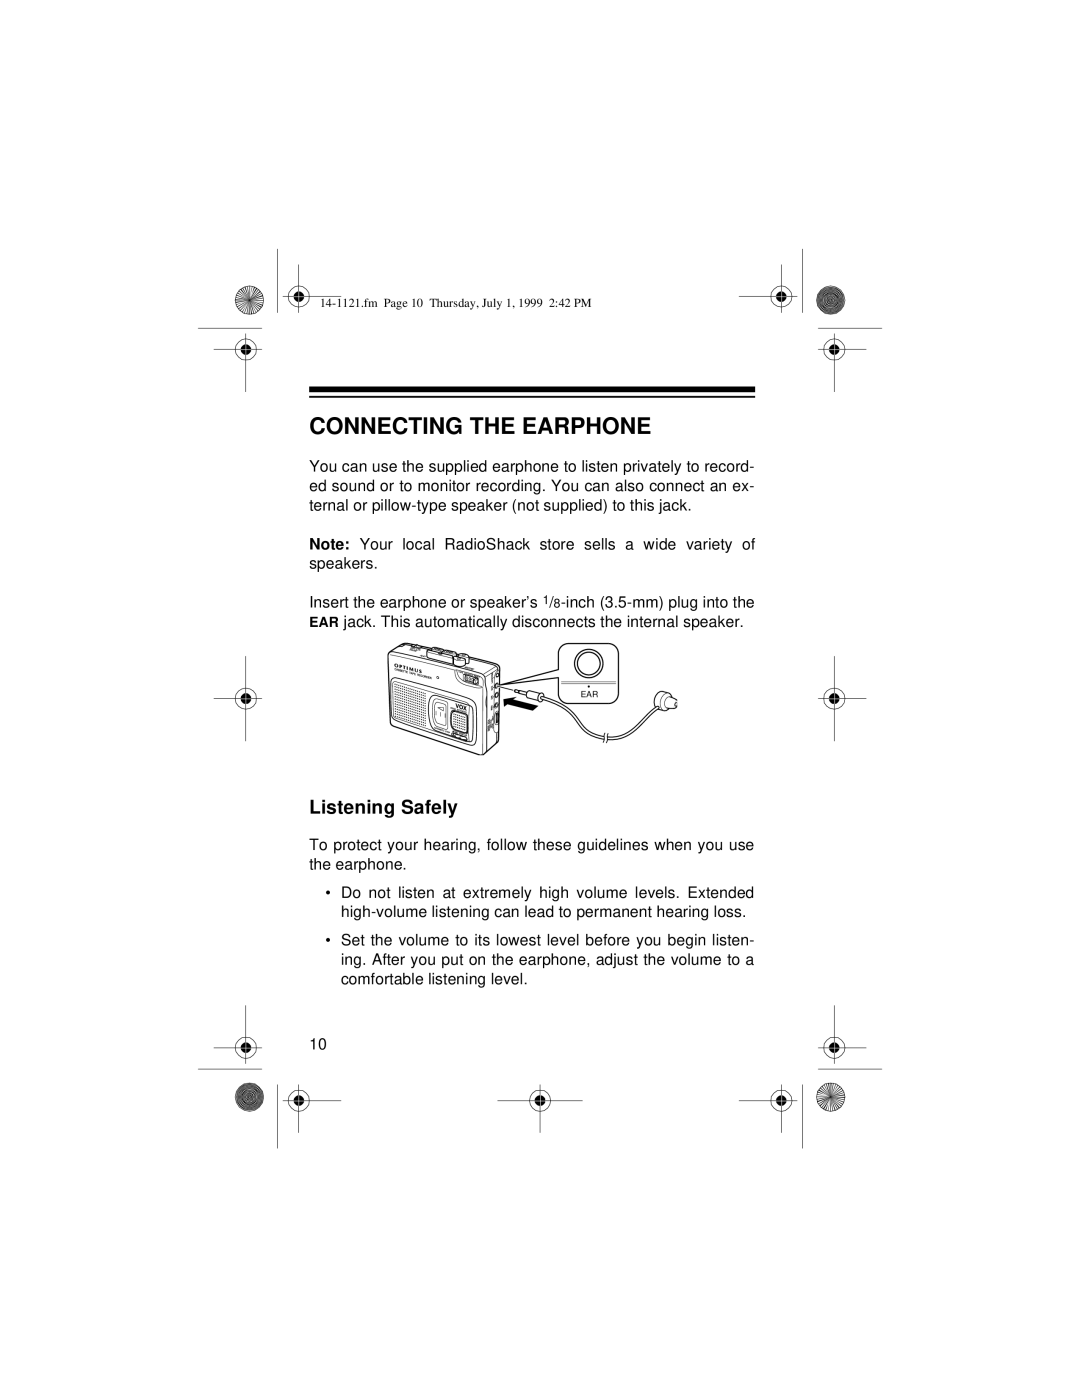 Optimus 14-1121, CTR-115, 2133-920-0-01 owner manual Connecting The Earphone, Listening Safely 